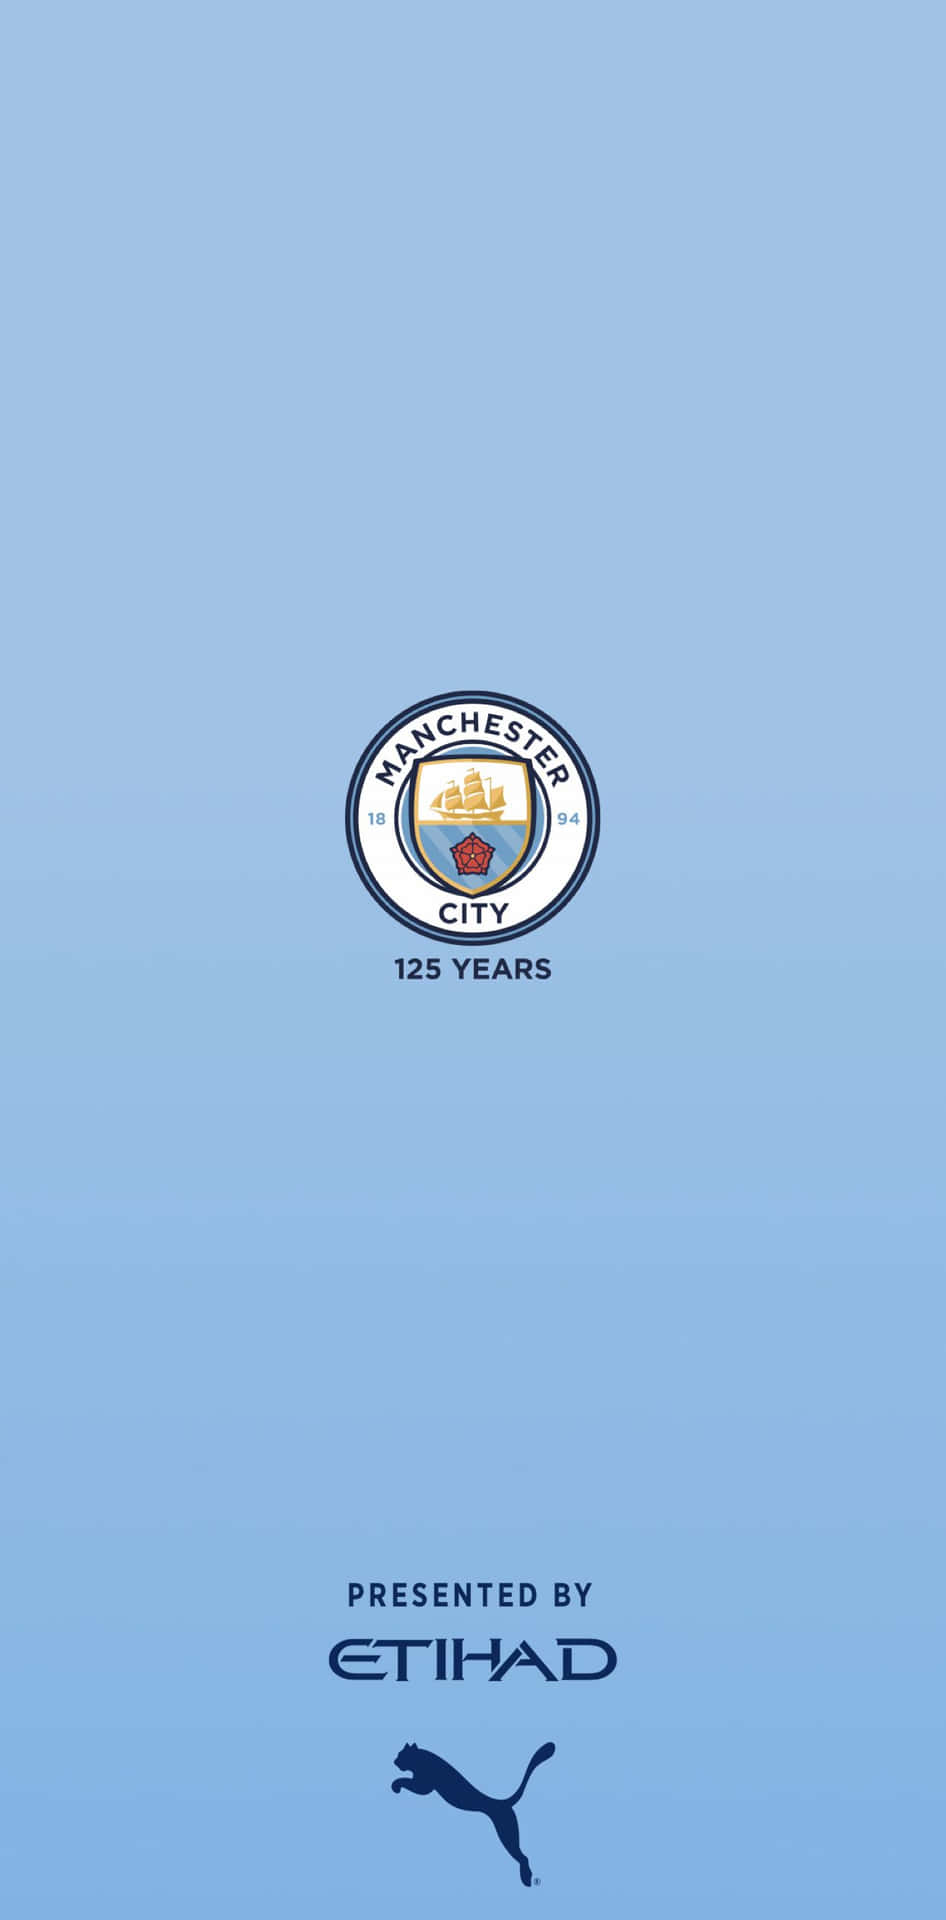 The perfect accessory for a true Manchester City Football enthusiast - an official Manchester City iPhone Wallpaper